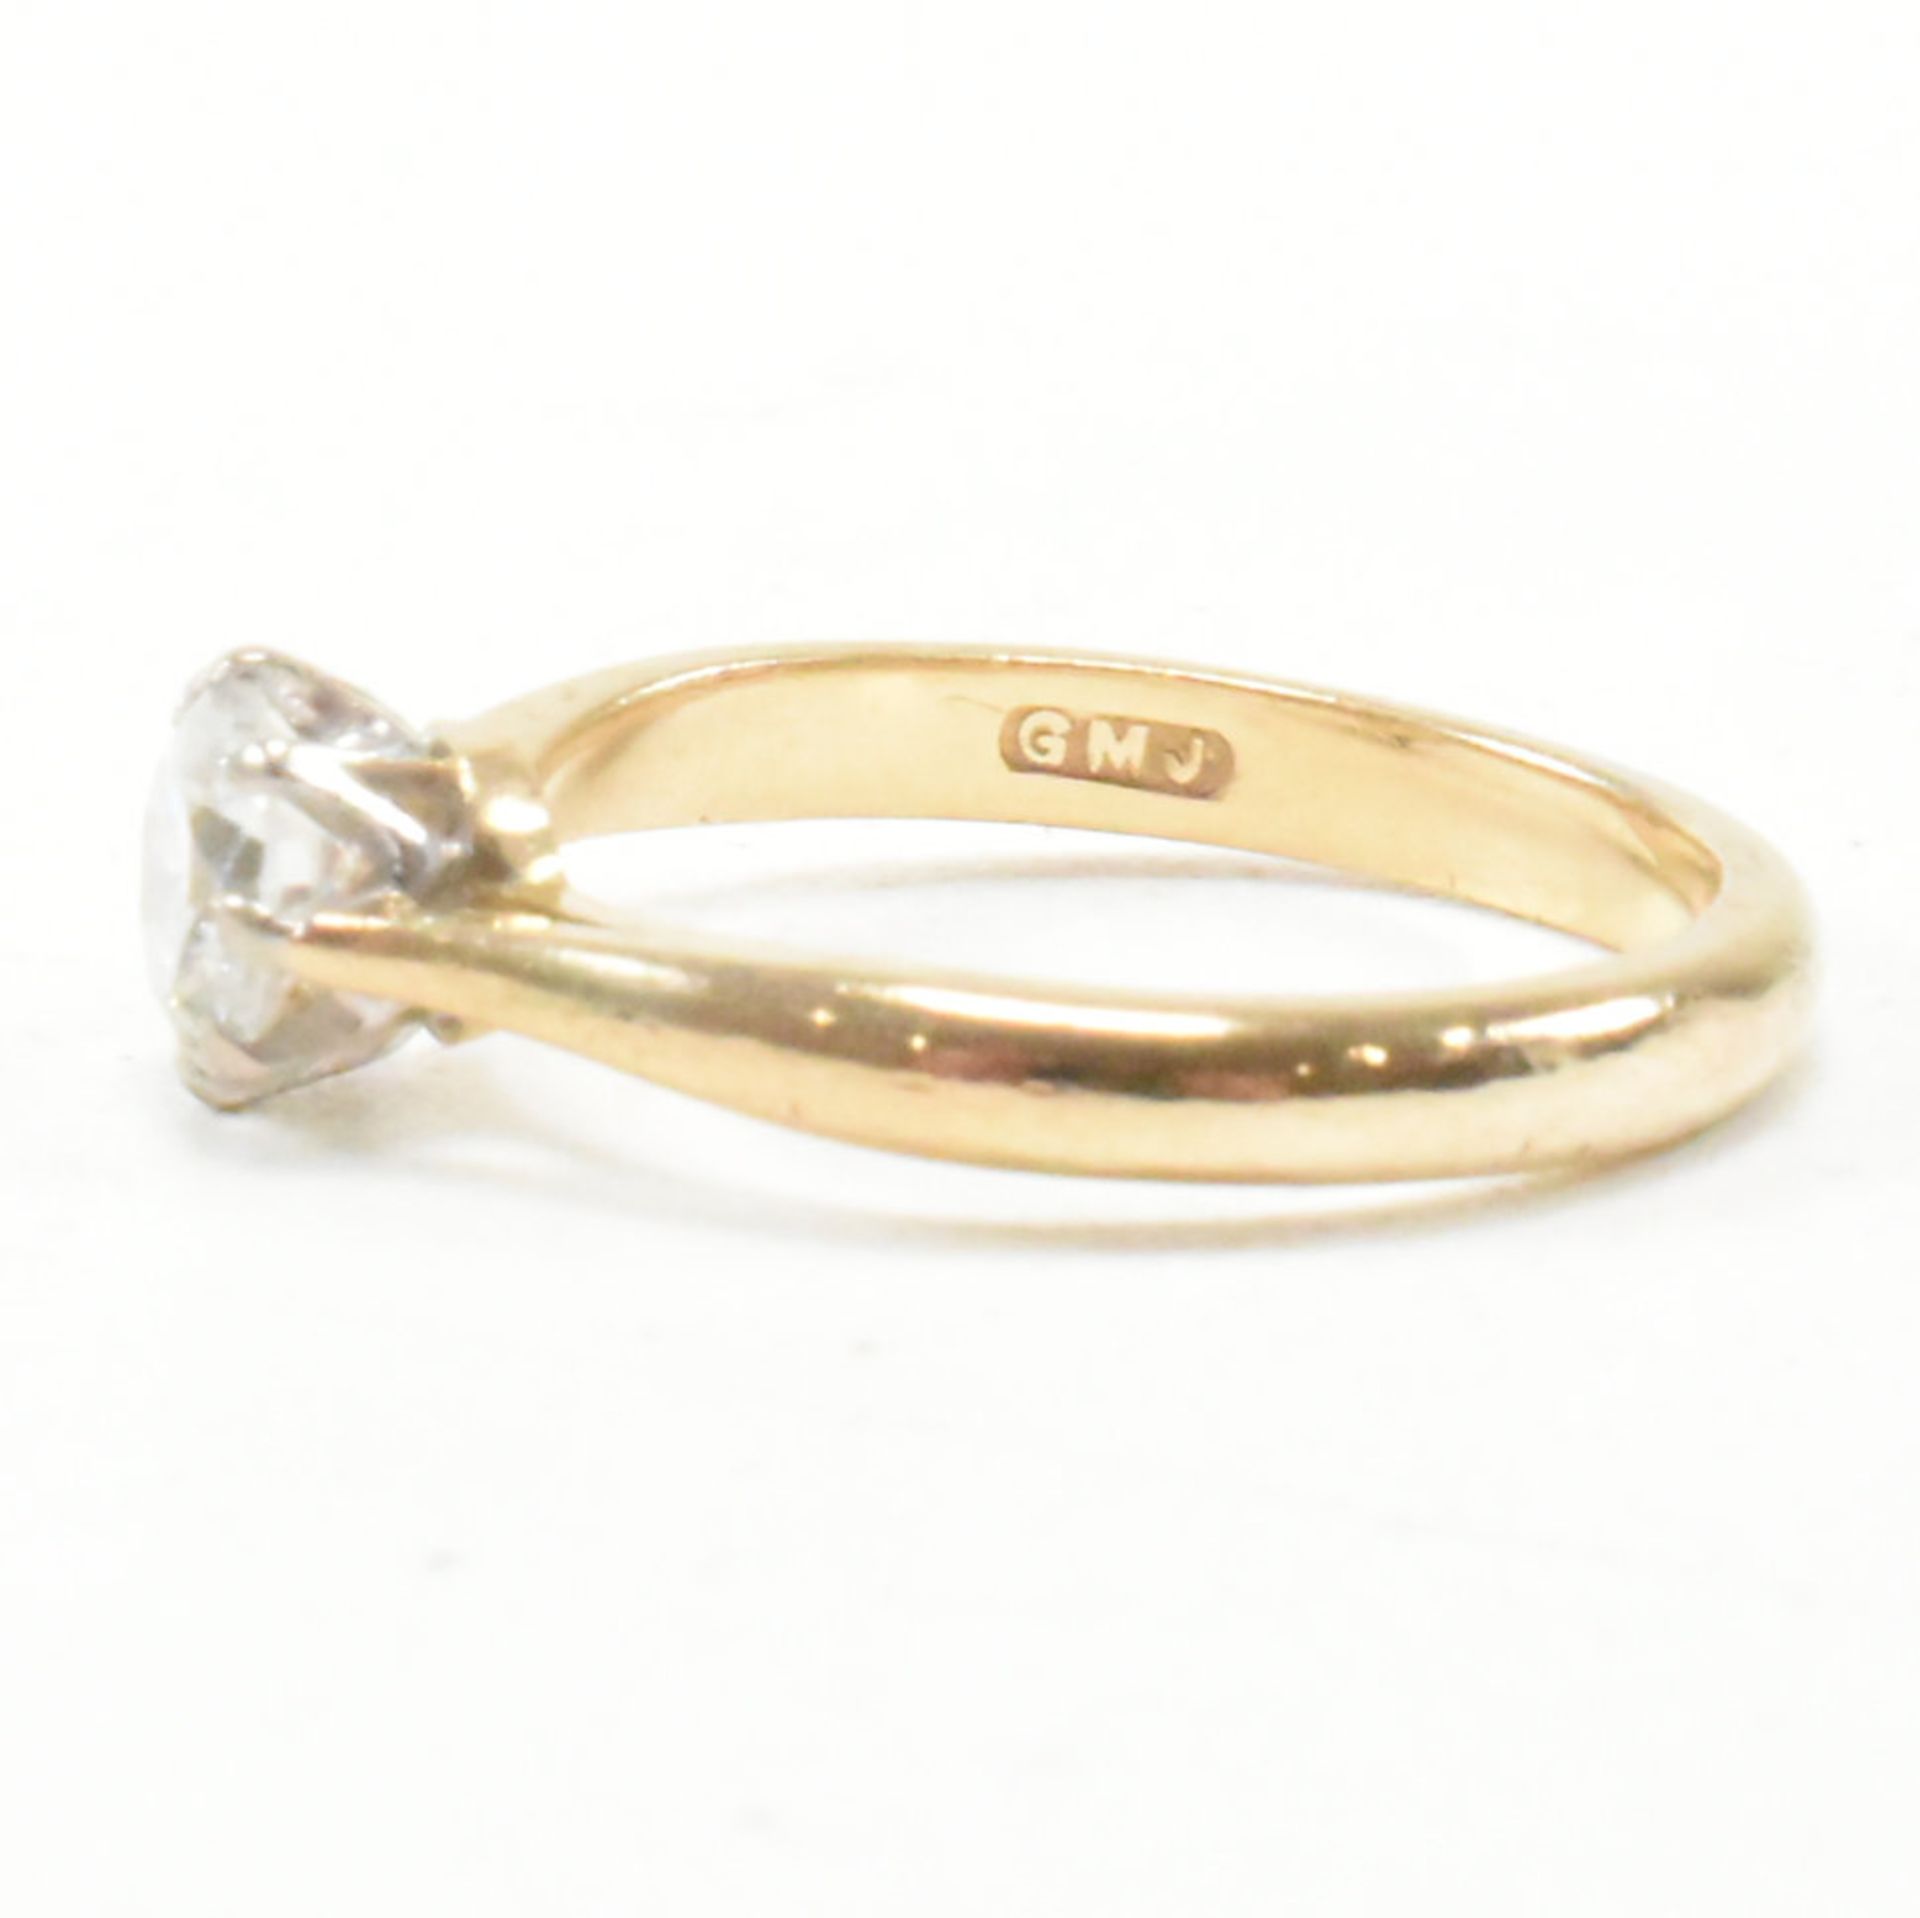 18CT GOLD & DIAMOND SOLITAIRE RING - Image 6 of 7